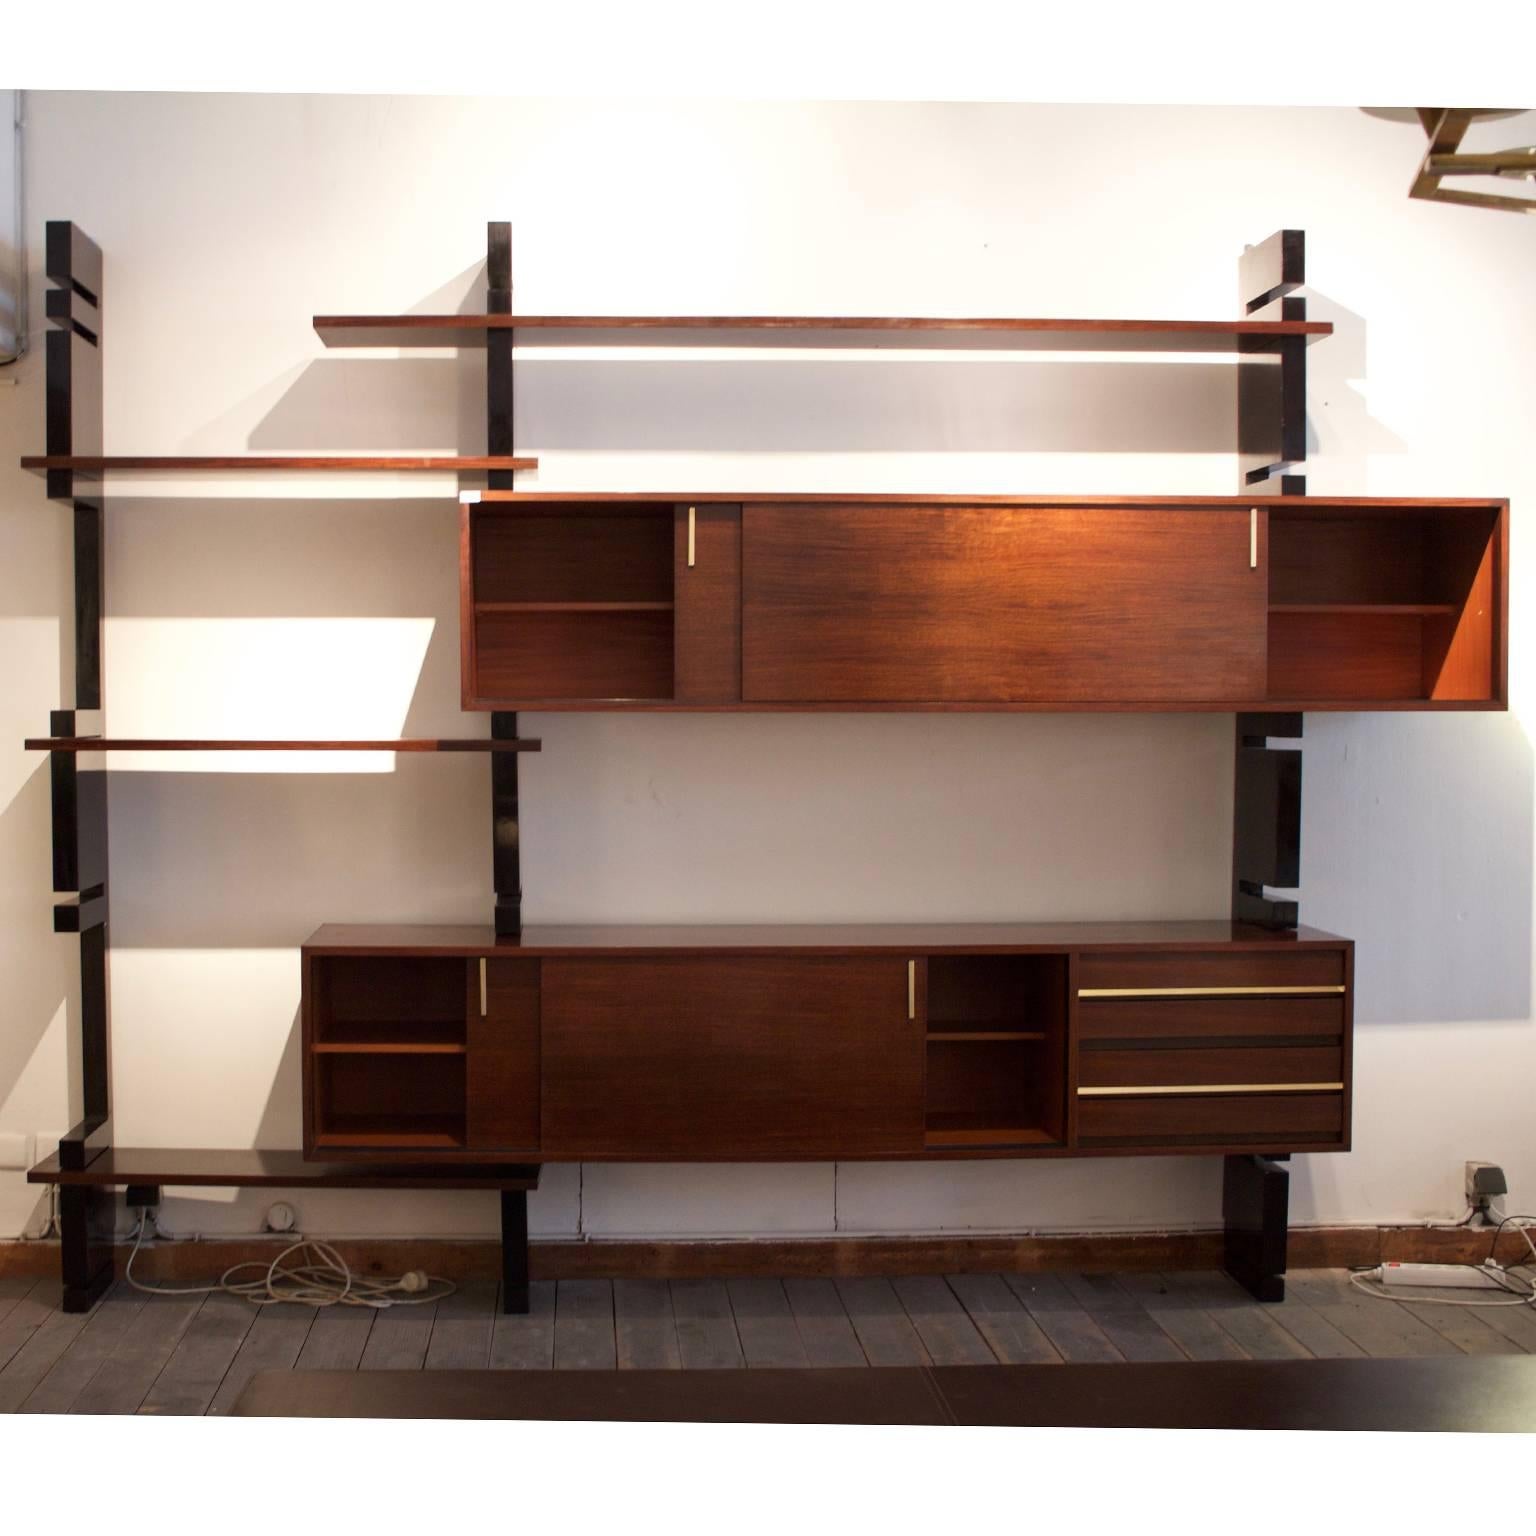 Modular system composed by black lacquered uprights and rosewood shelves and sliding doors cabinets.
Beautiful brass hand grips and a clear configuration that allows simple positioning changes of the shelves and cabinets.